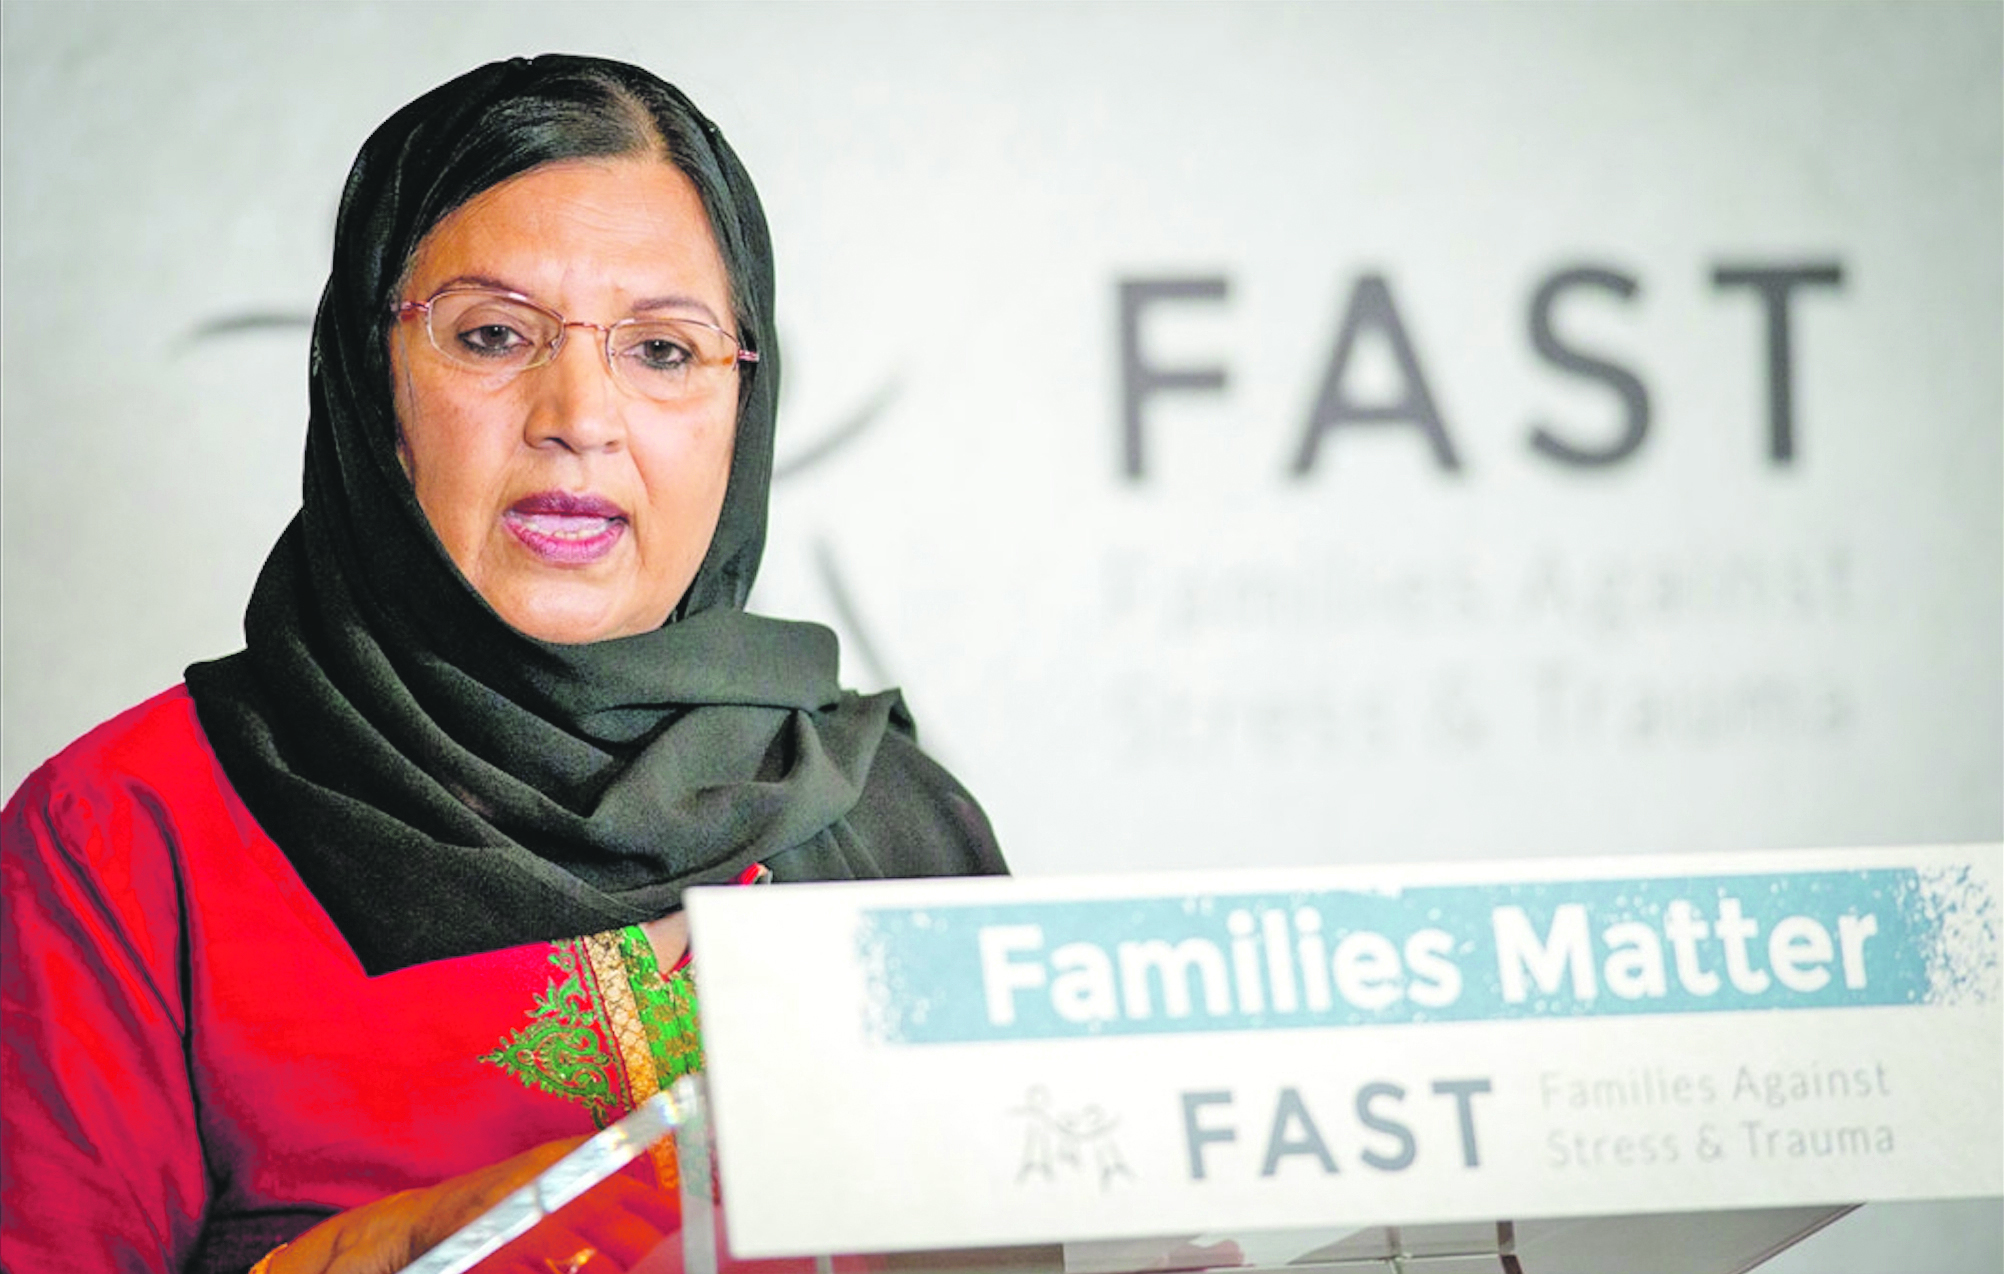 Saleha Jaffer is founder of FAST, and has met the mothers of children who have travelled to Syria